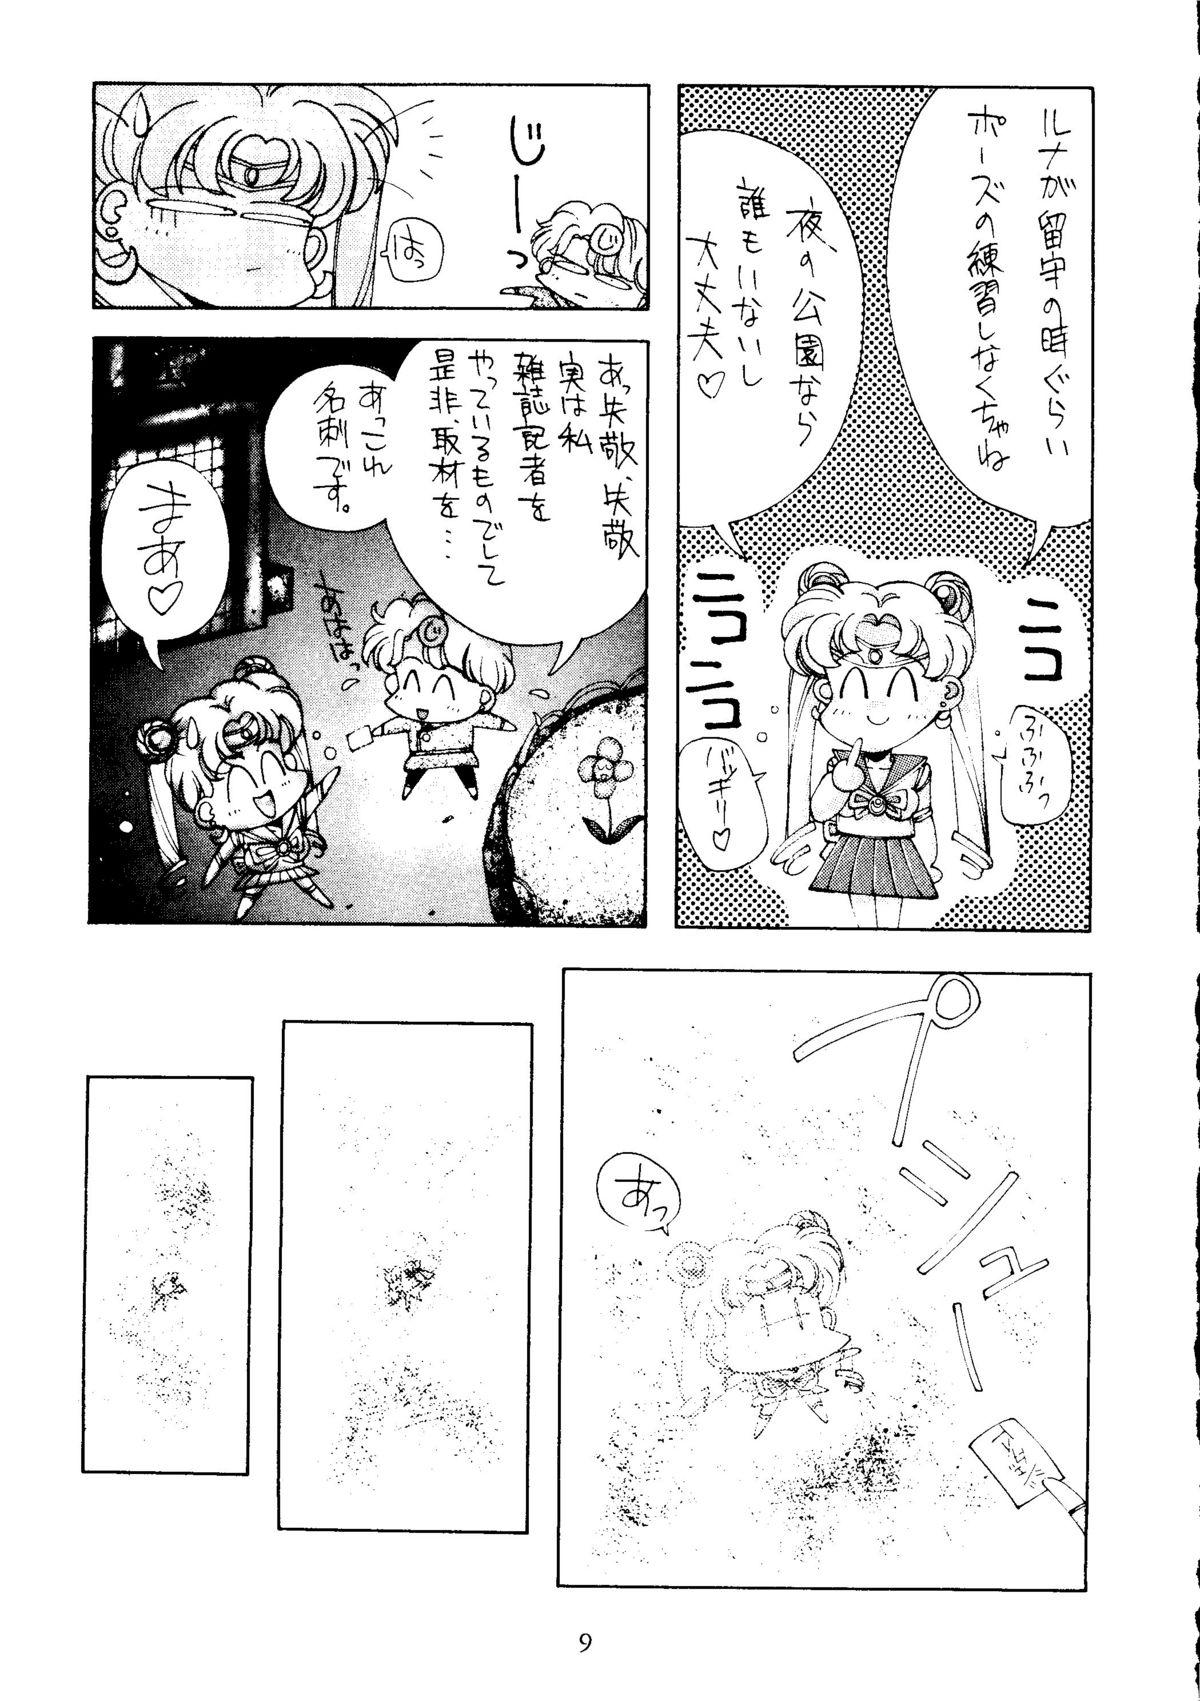 Red Sailor Moon Mate Vol. 1 - Sailor moon Adorable - Page 8